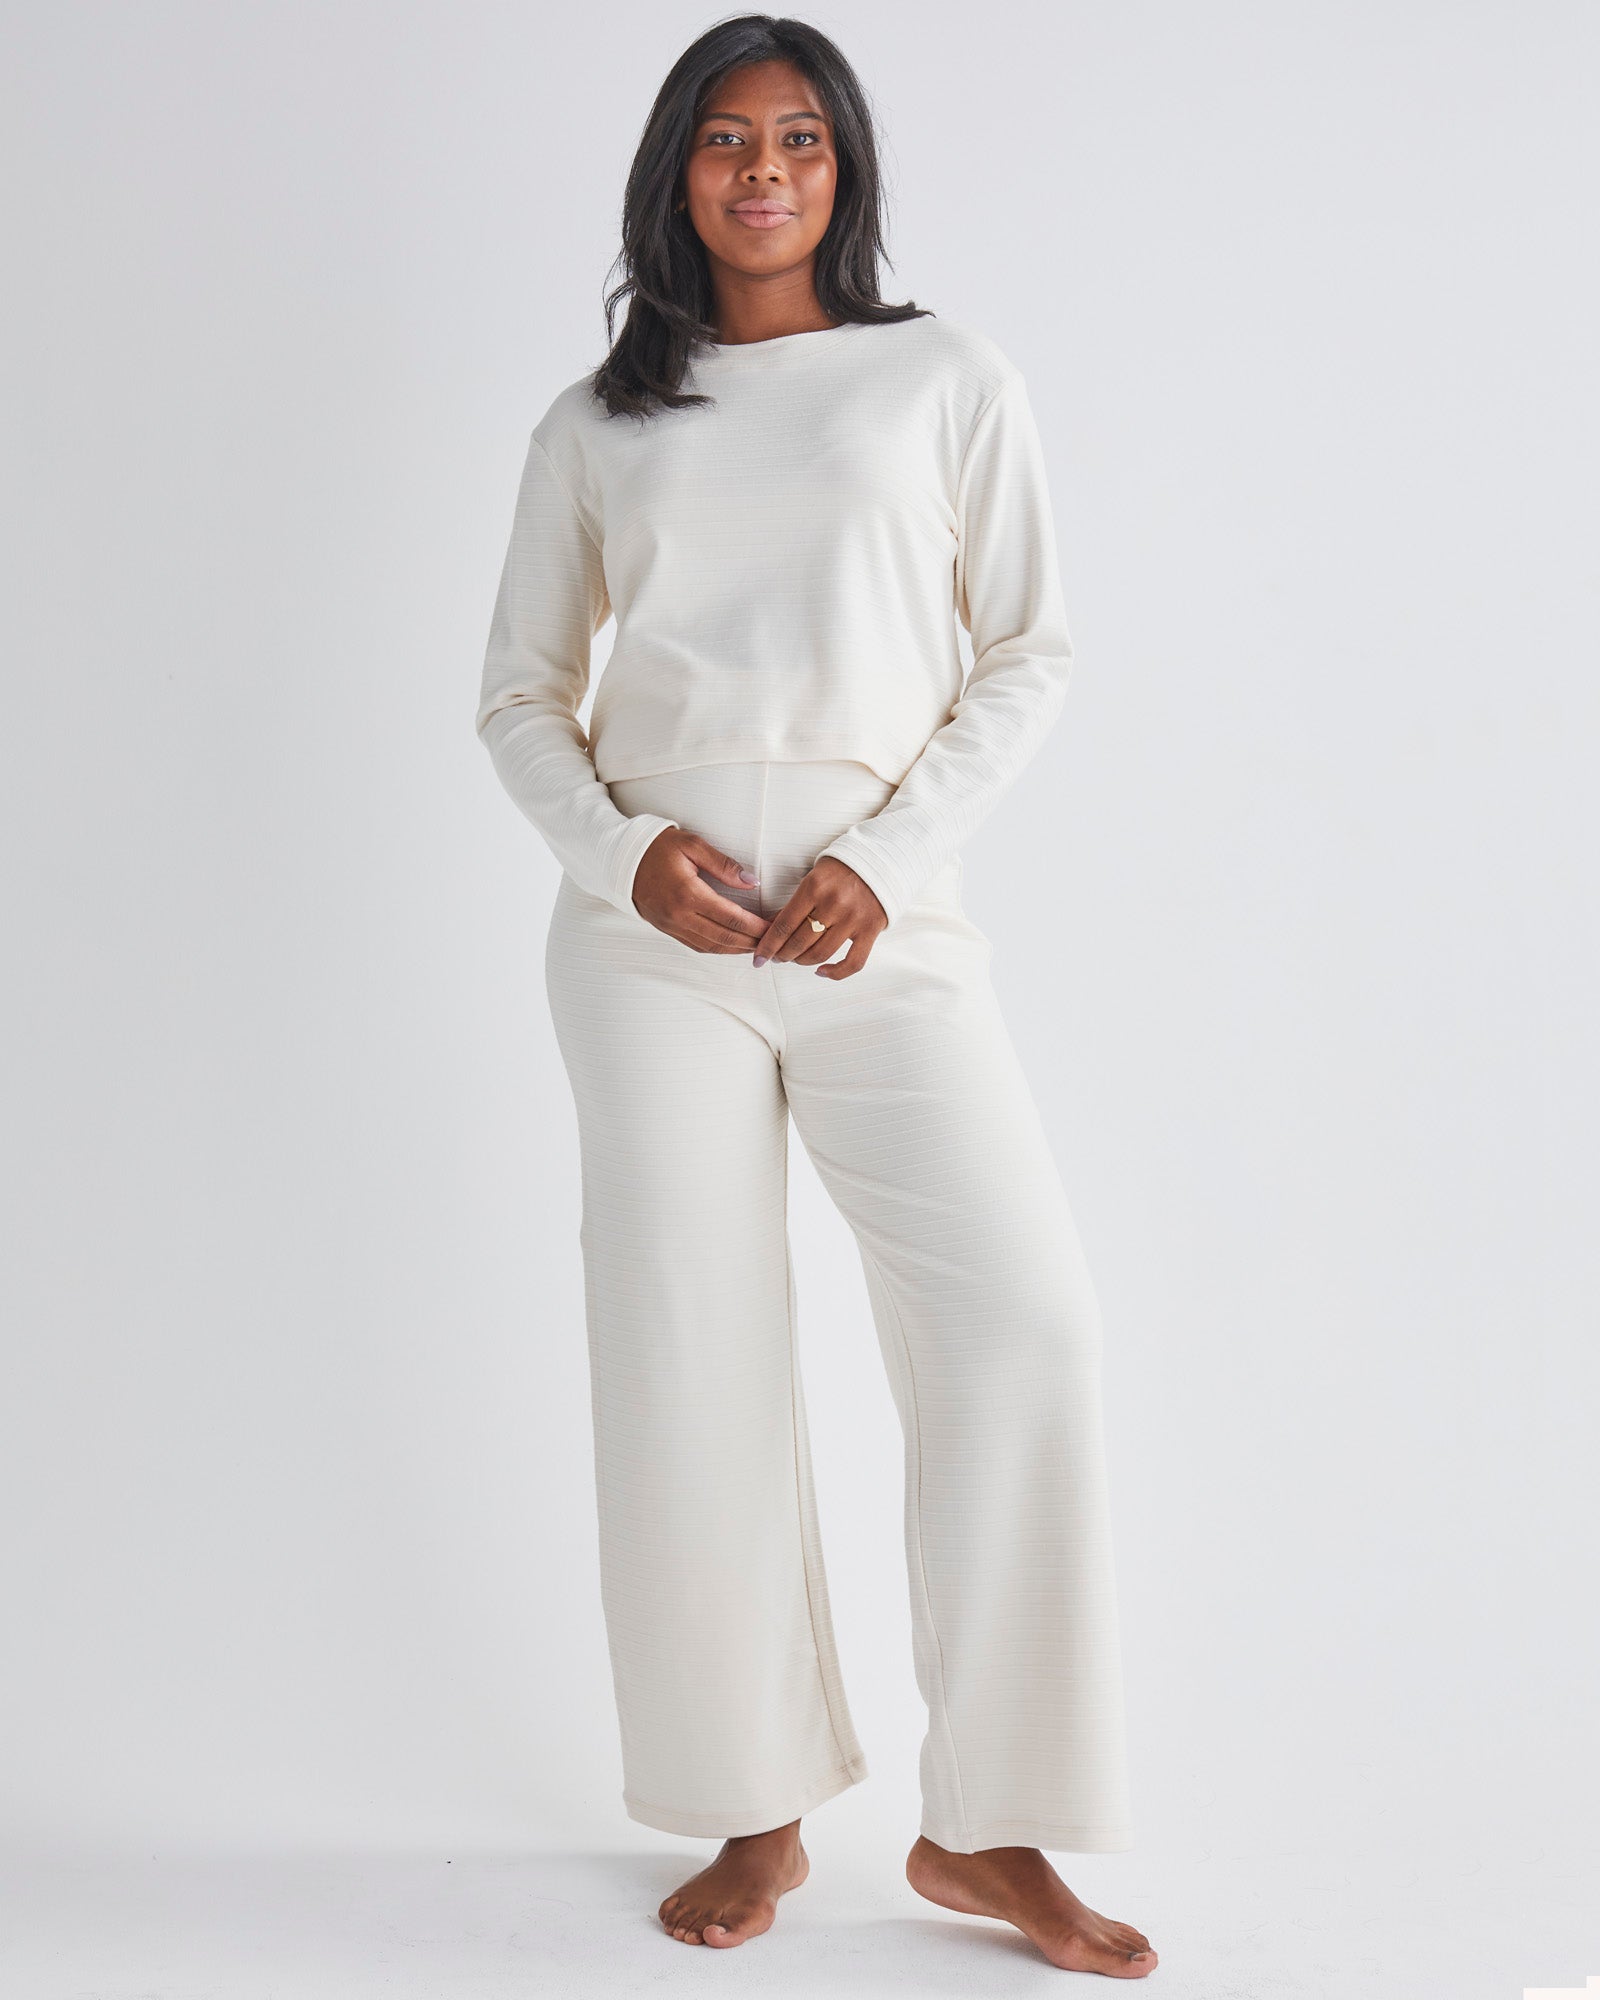 A pregnant Woman Wearing 2-piece Maternity Winter Lounge Set in Cream White from Angel Maternity